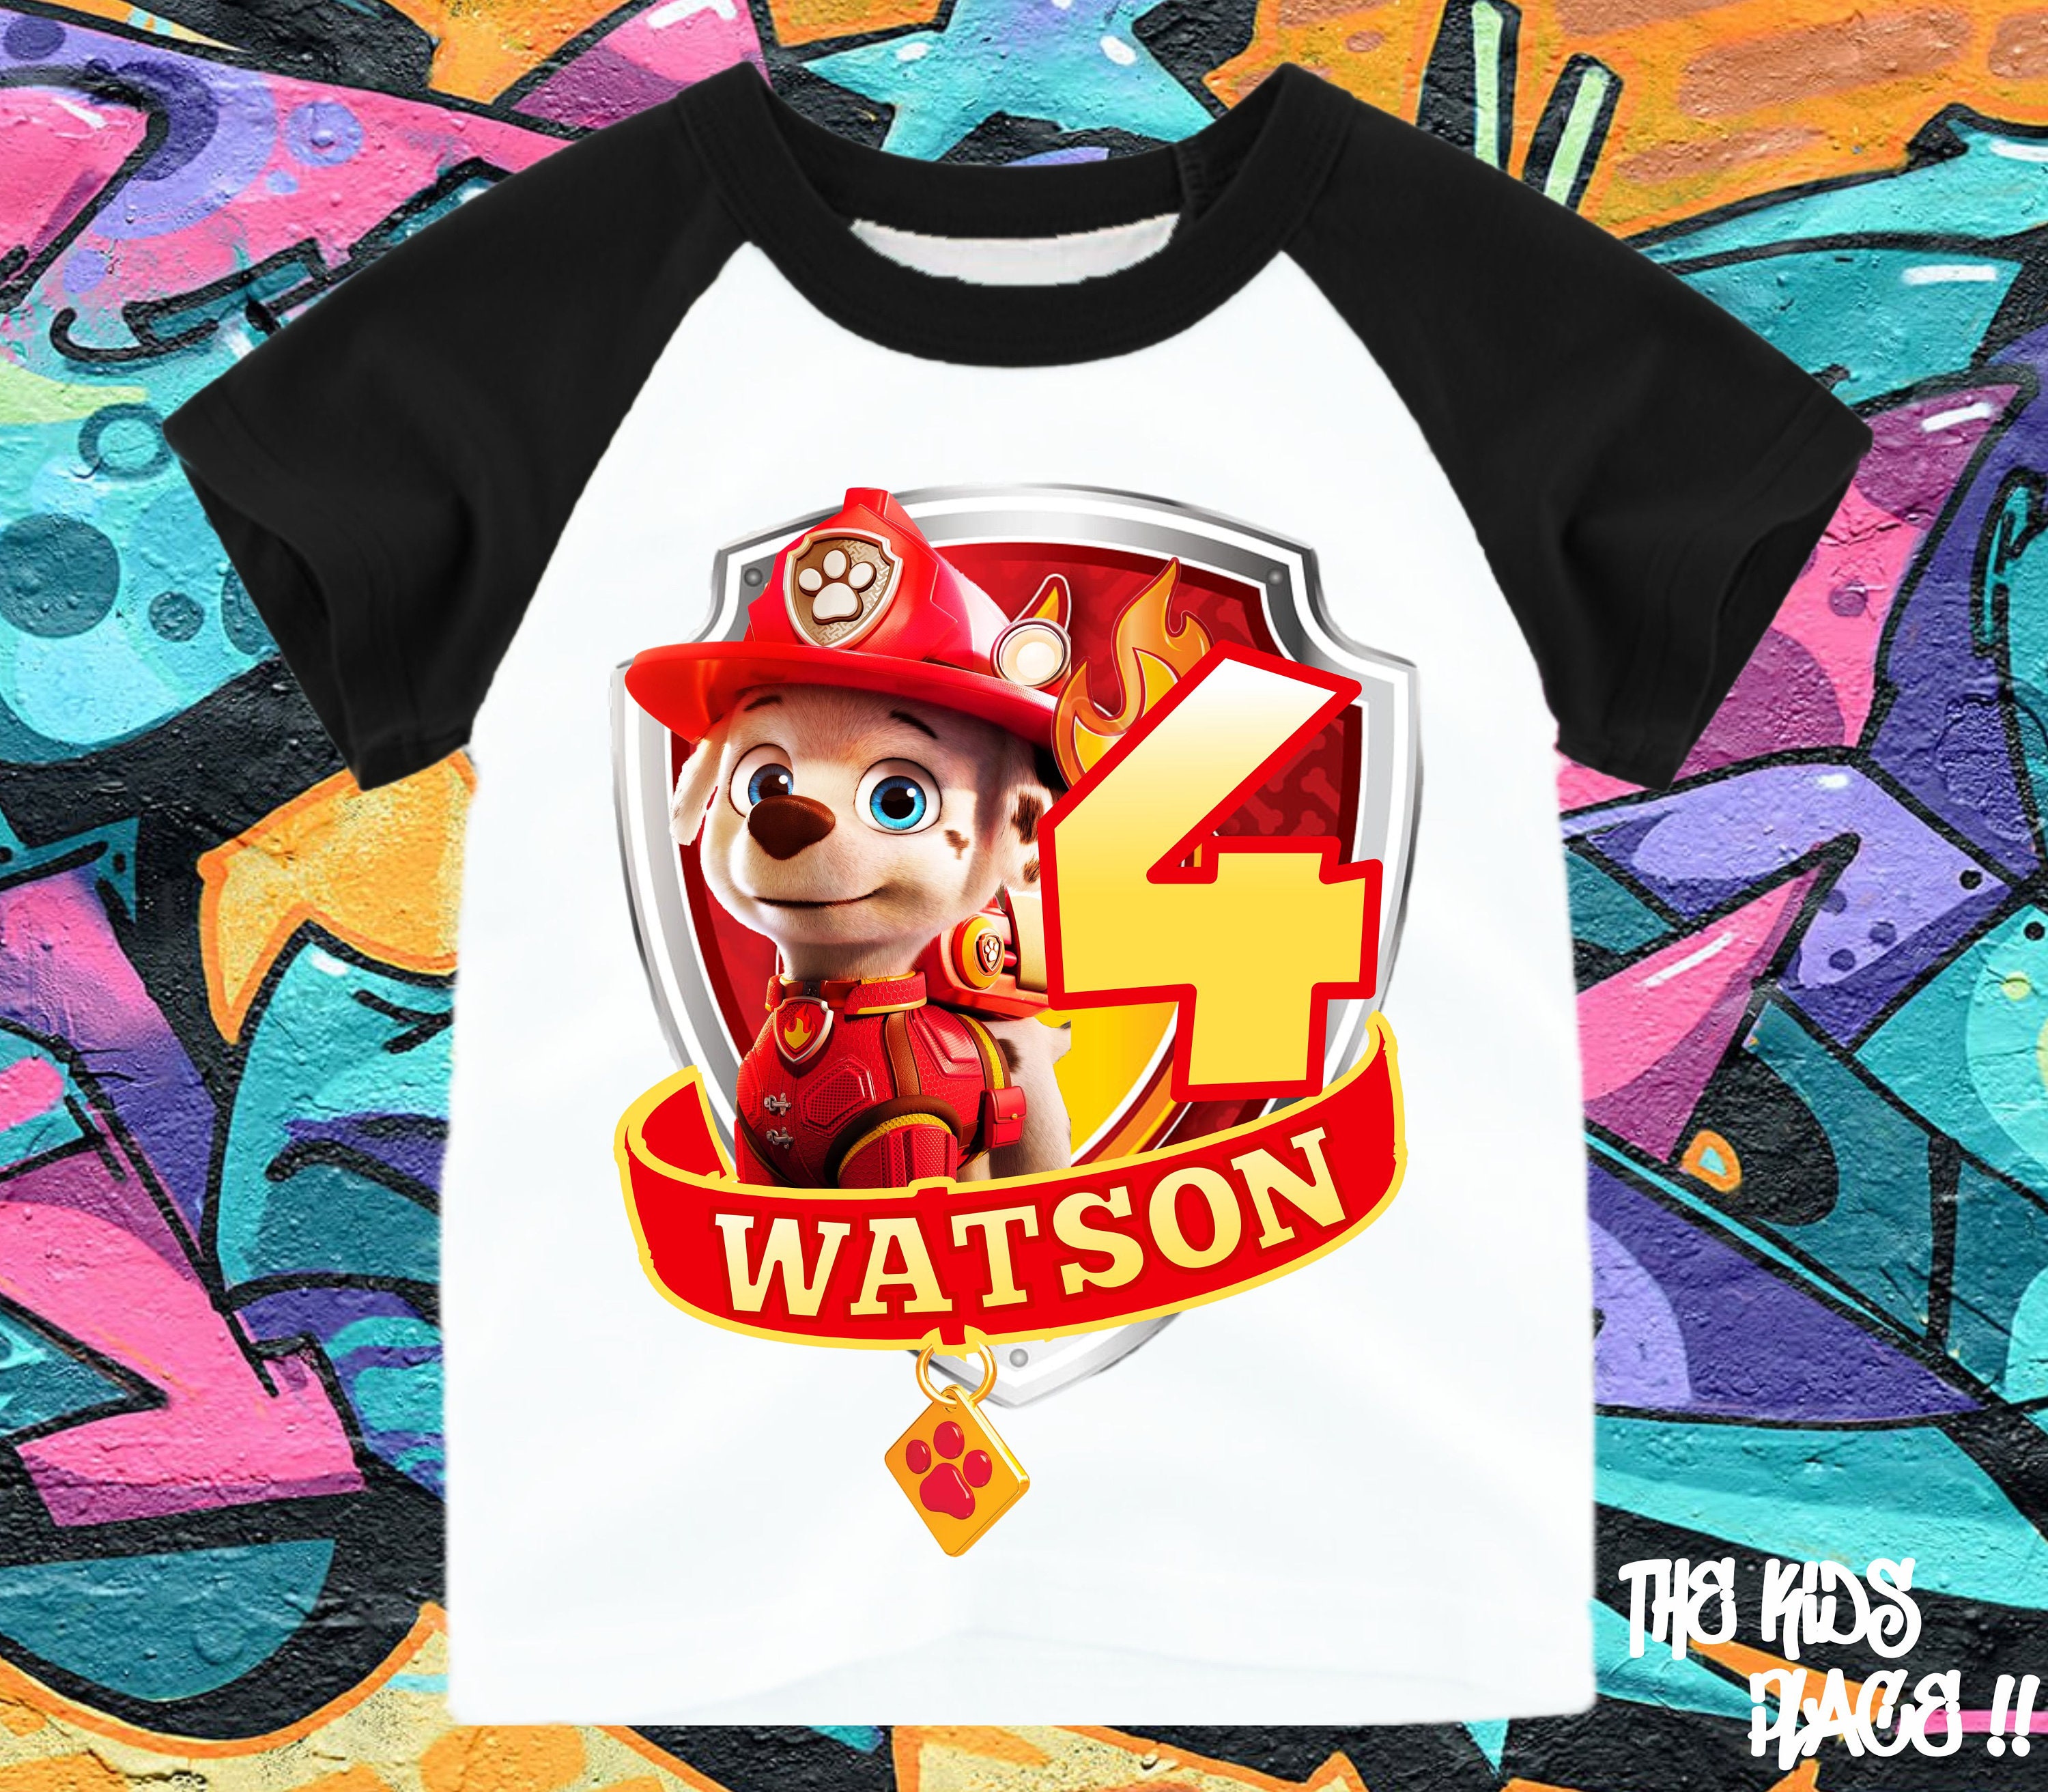 NEW CUSTOM PERSONALIZED PAW PATROL RUBBLE BIRTHDAY T SHIRT PARTY FAVOR ADD 